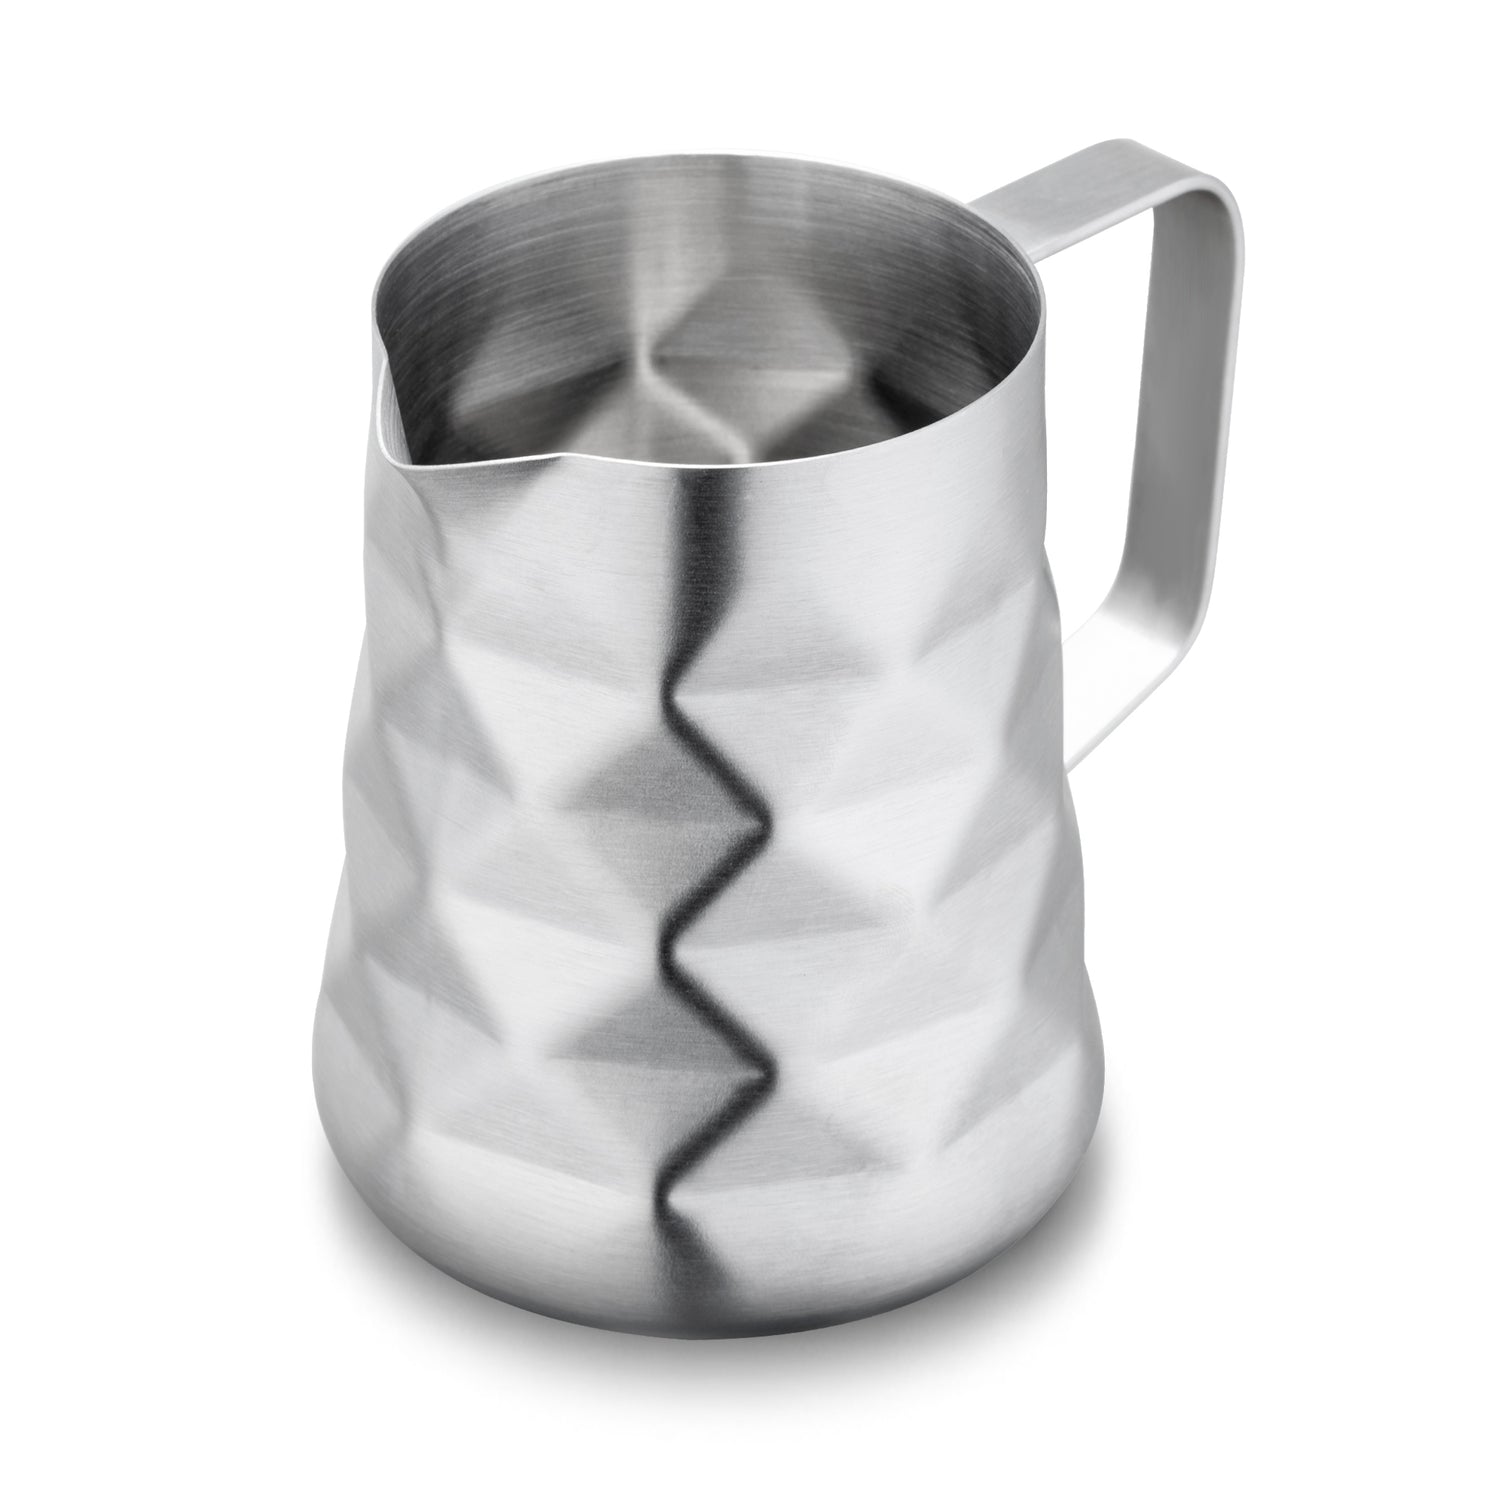 20 Ounce Sleek And Stylish Barista Frothing Pitcher For Making Cappuccinos And Coffee Lattes Prismatic Pattern Stainless Steel